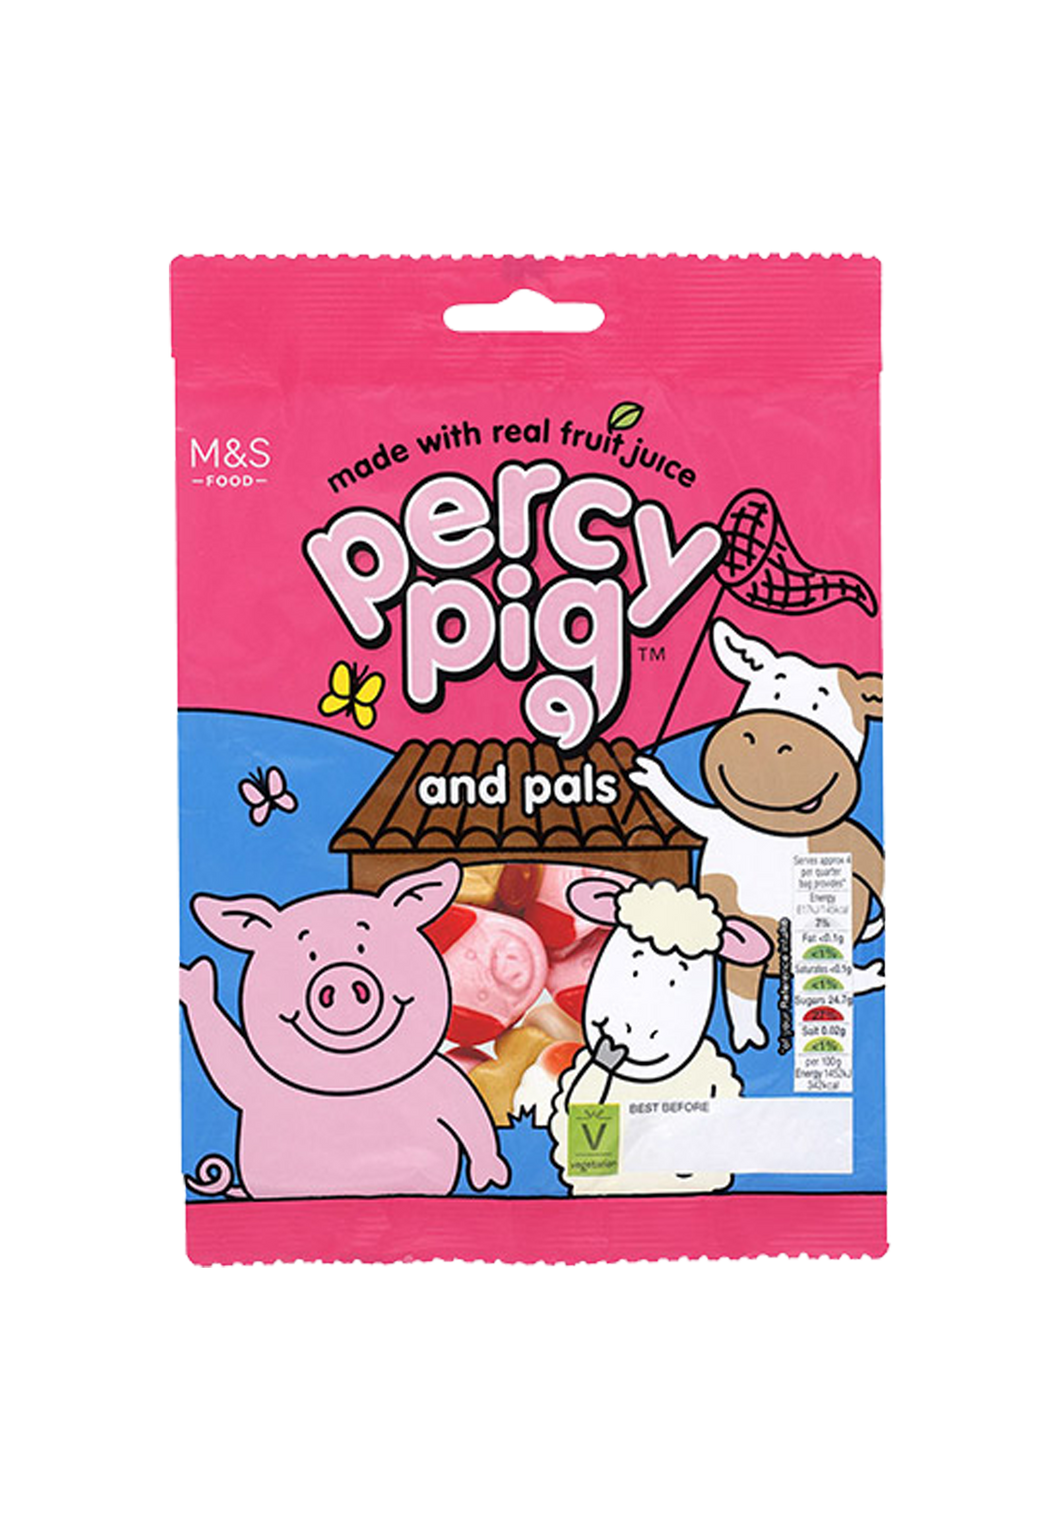 Percy Pig and pals 170g